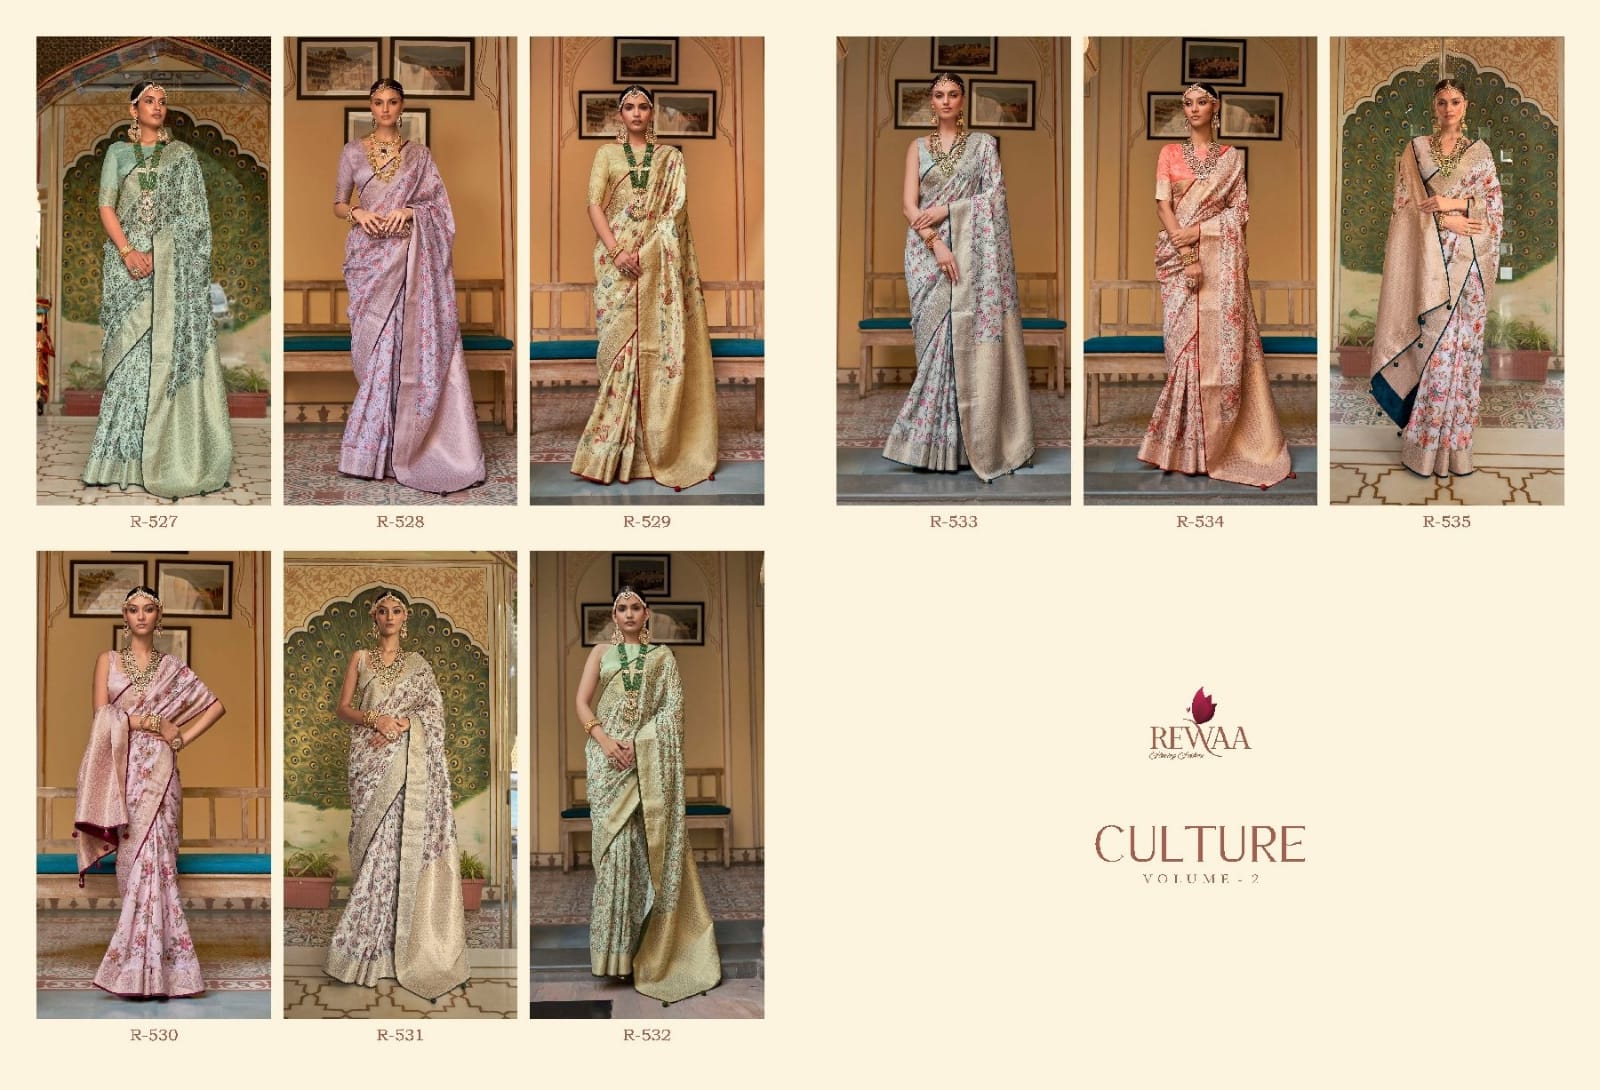 Rewaa Culture 2 collection 20